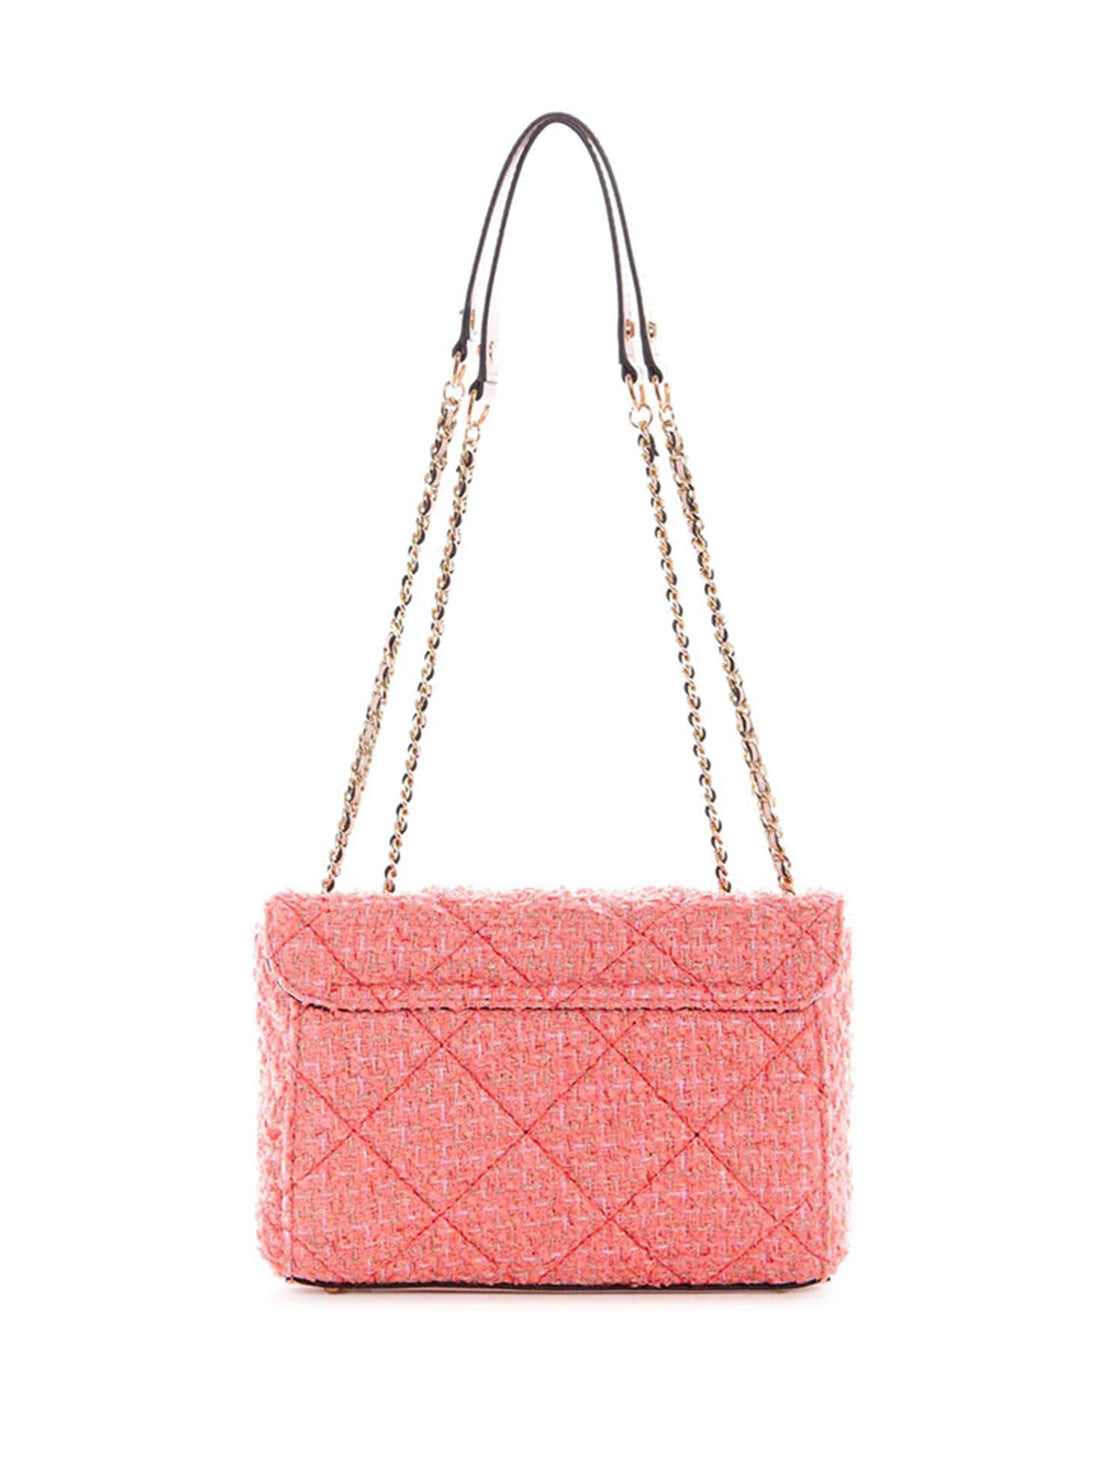 GUESS Womens Coral Pink Tweed Cessily Convertible Crossbody Bag TC767921 Back View